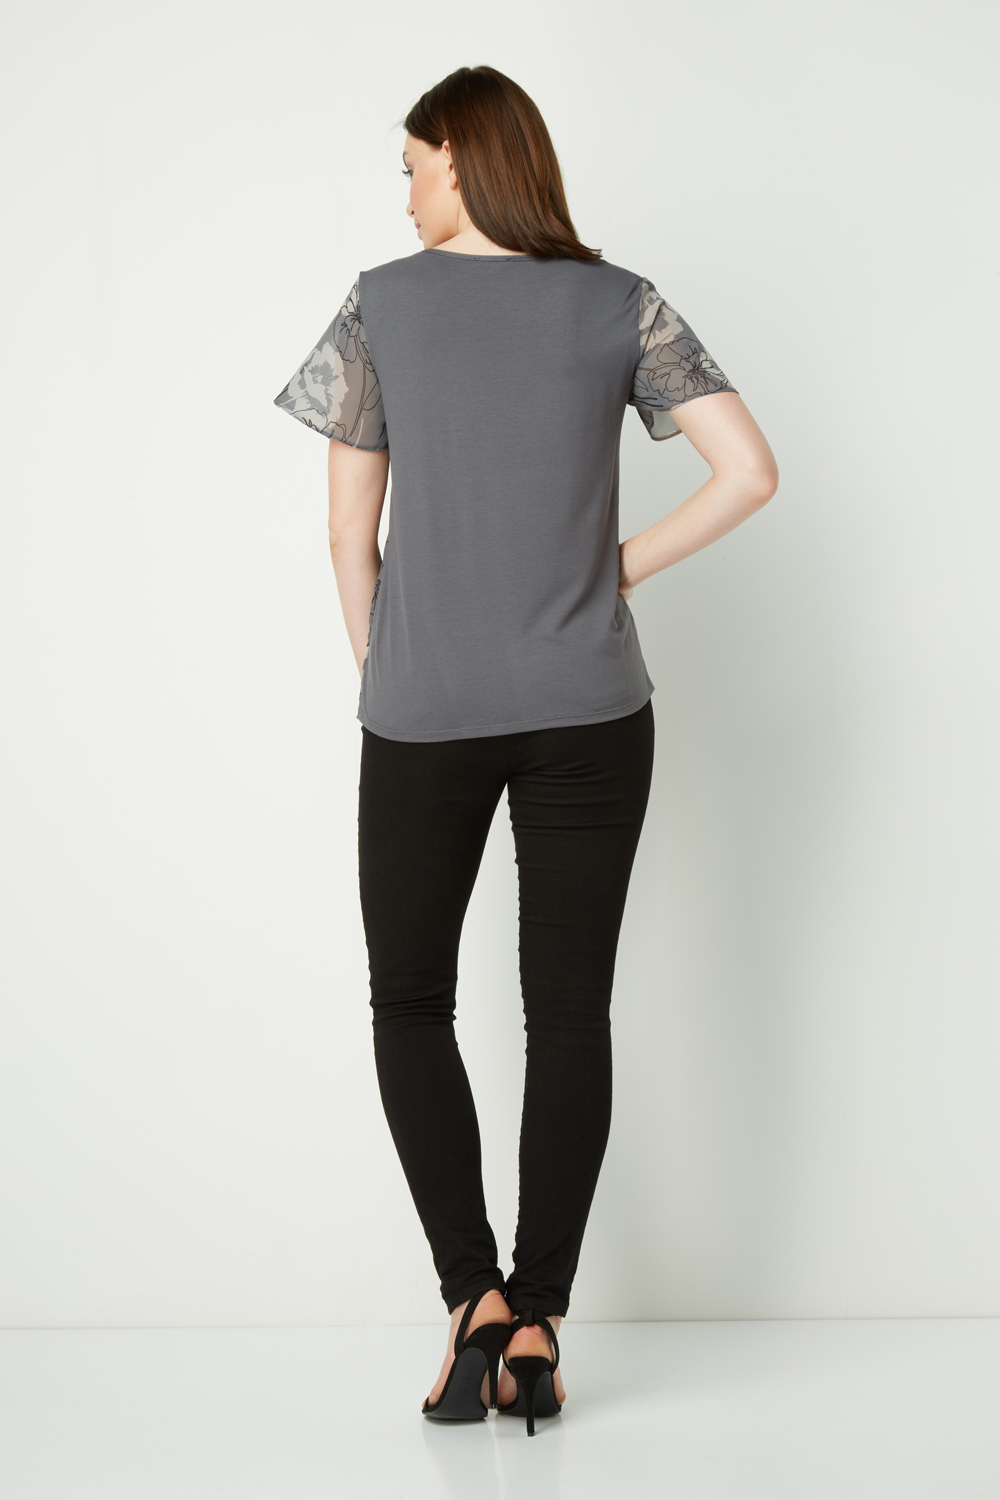 Grey Floral Asymmetric Ruffle Top, Image 2 of 4